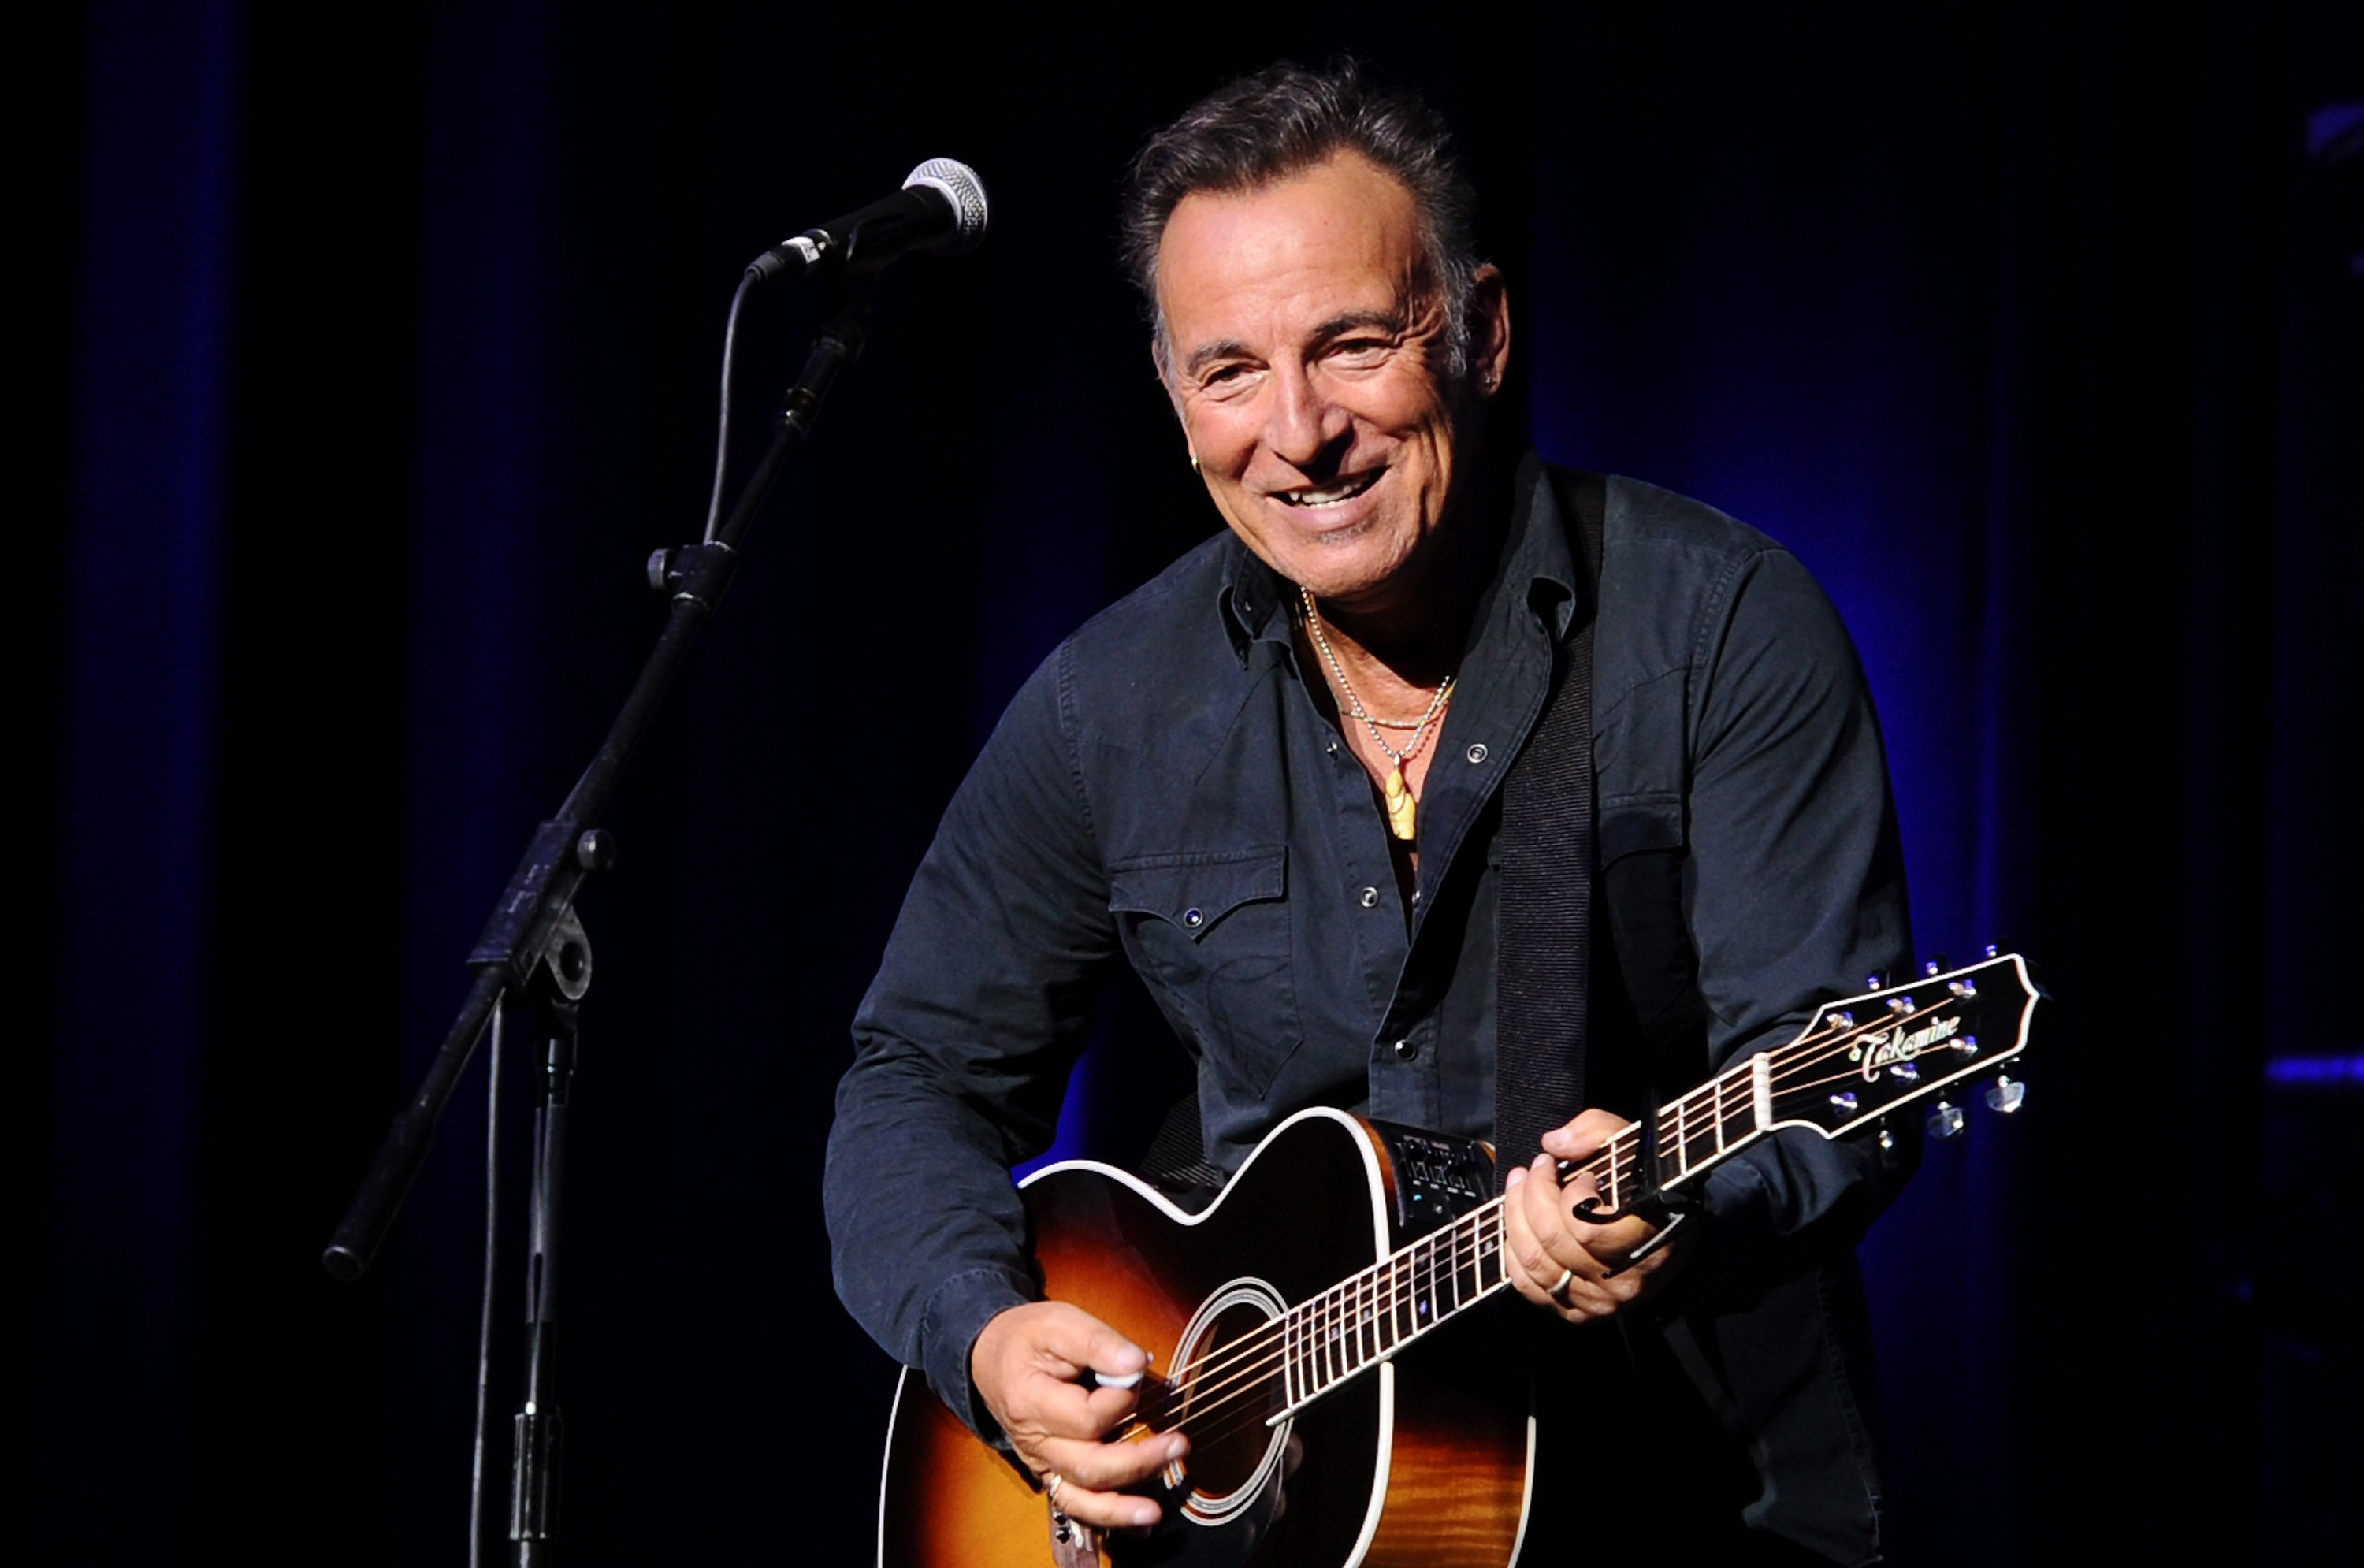 Bruce Springsteen on November 10, 2015 in New York City. | Source: Getty Images